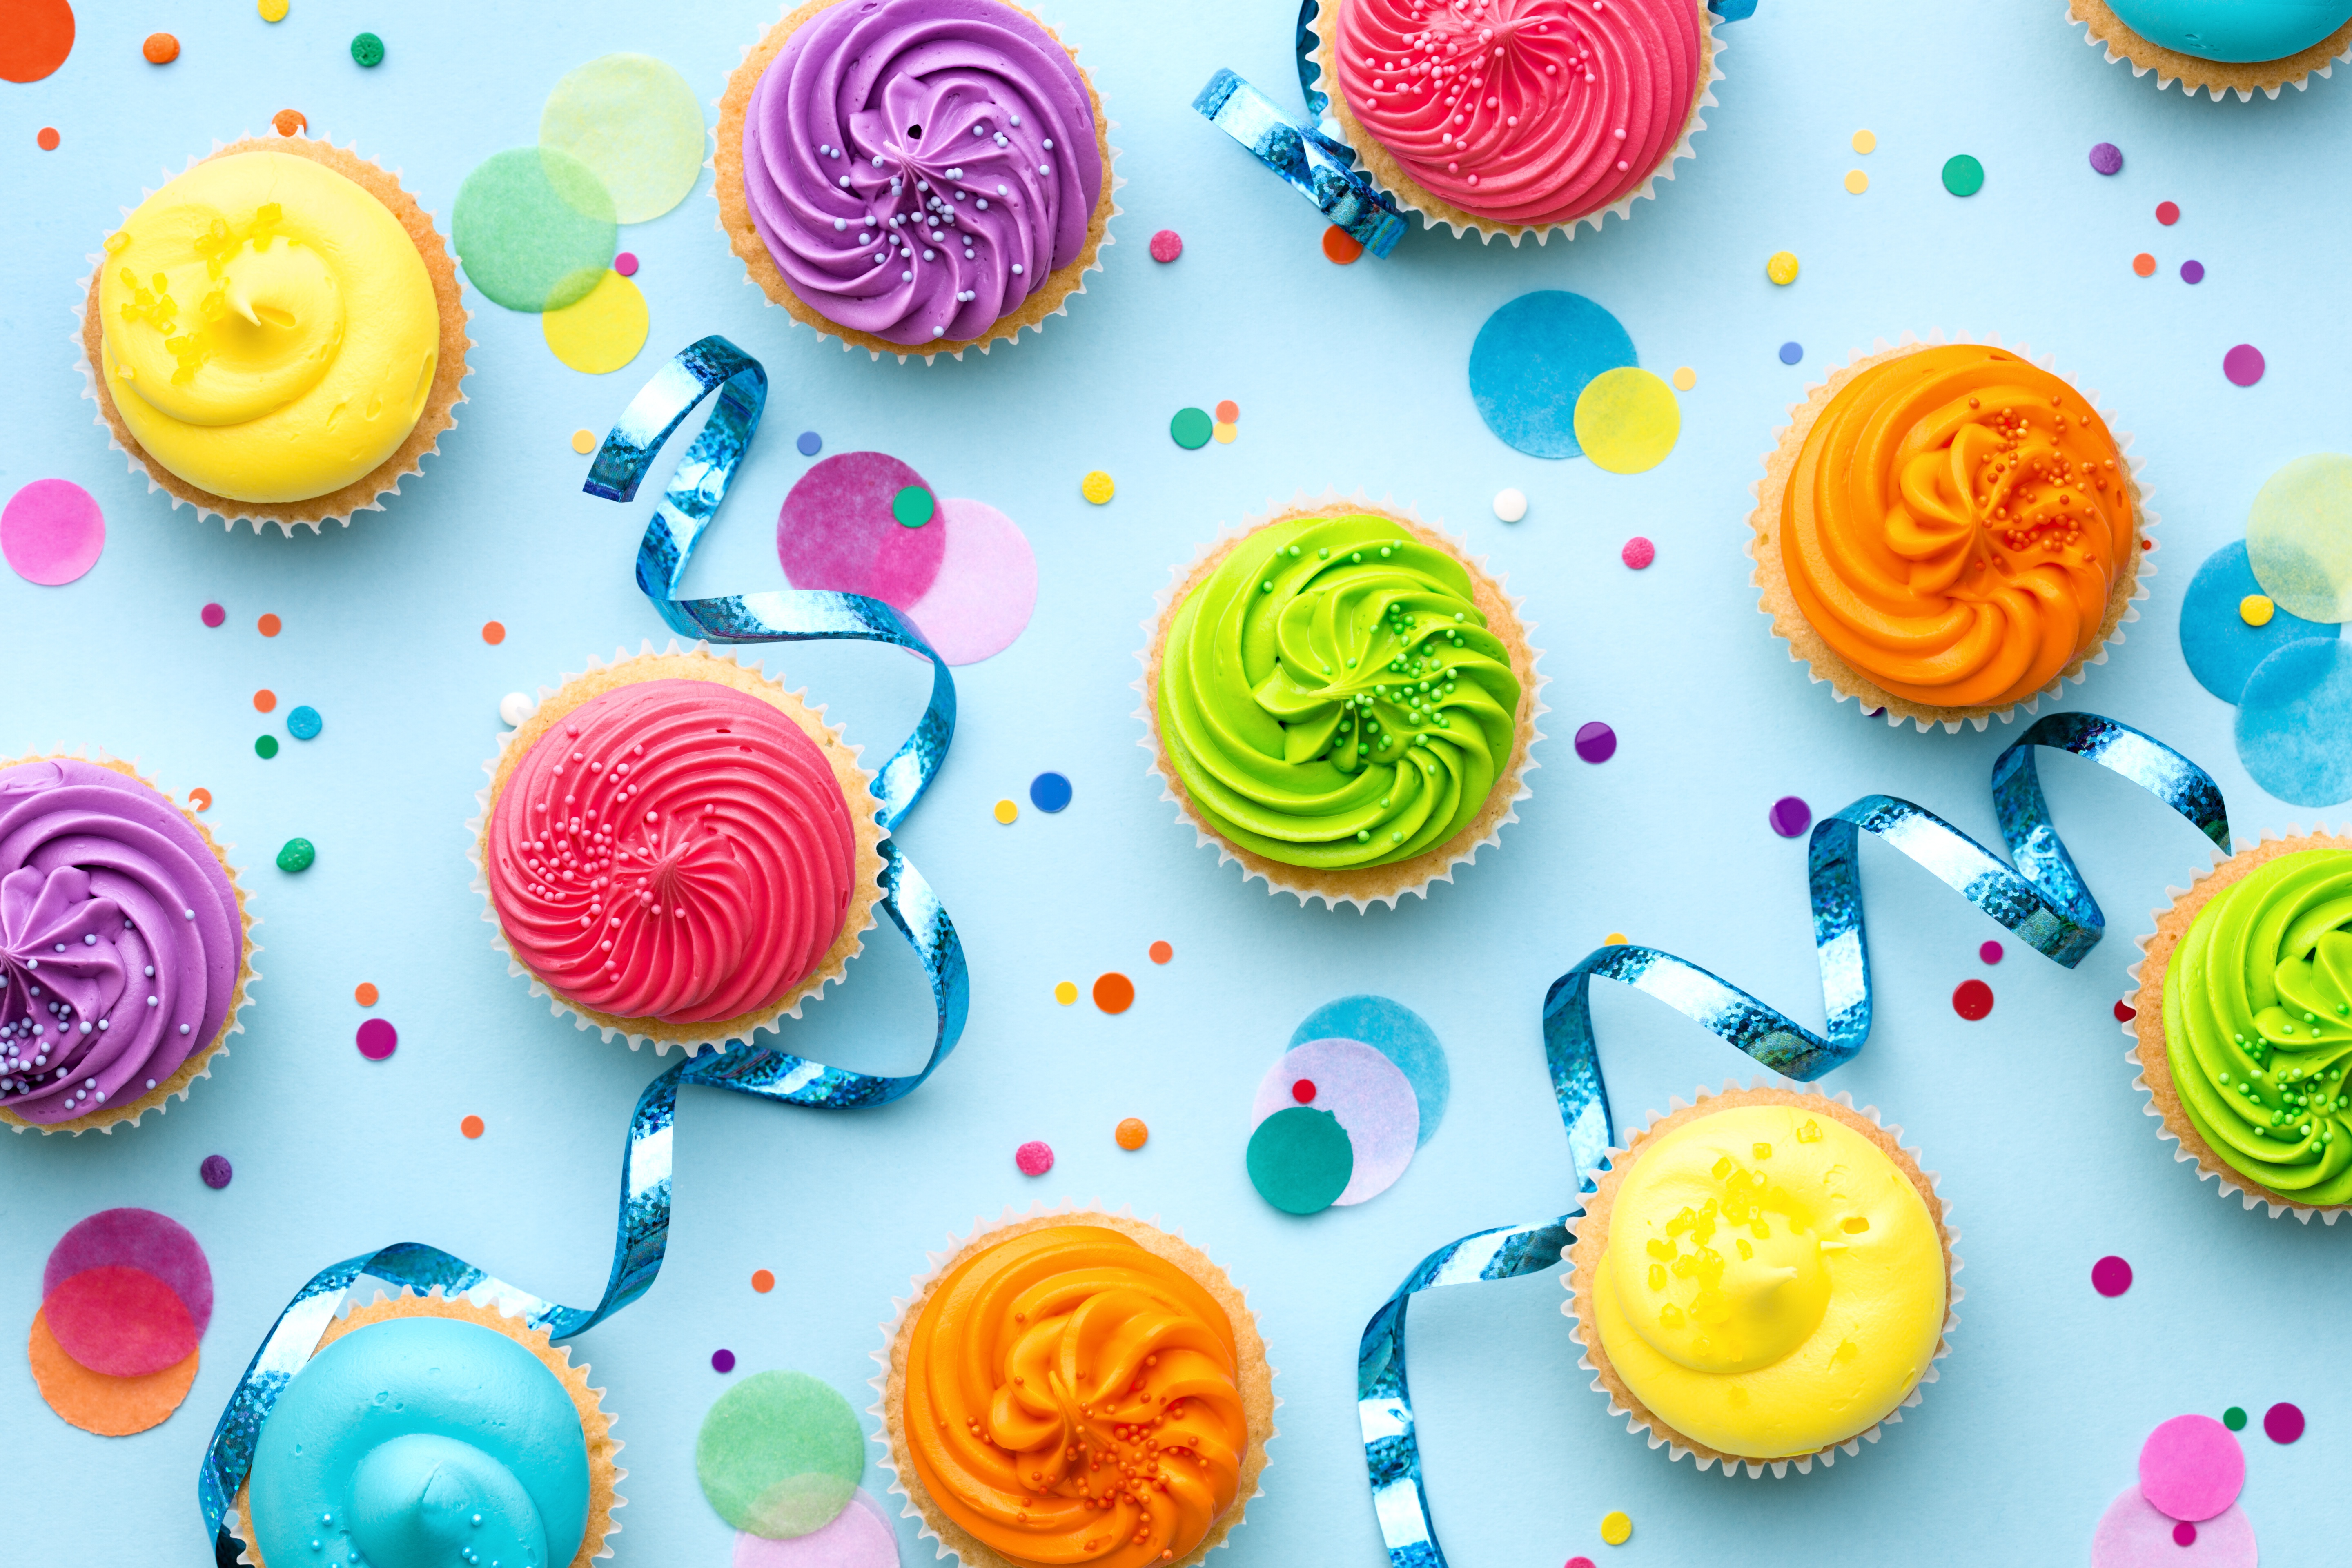 Colorful Cupcake Pastry Still Life 5760x3840